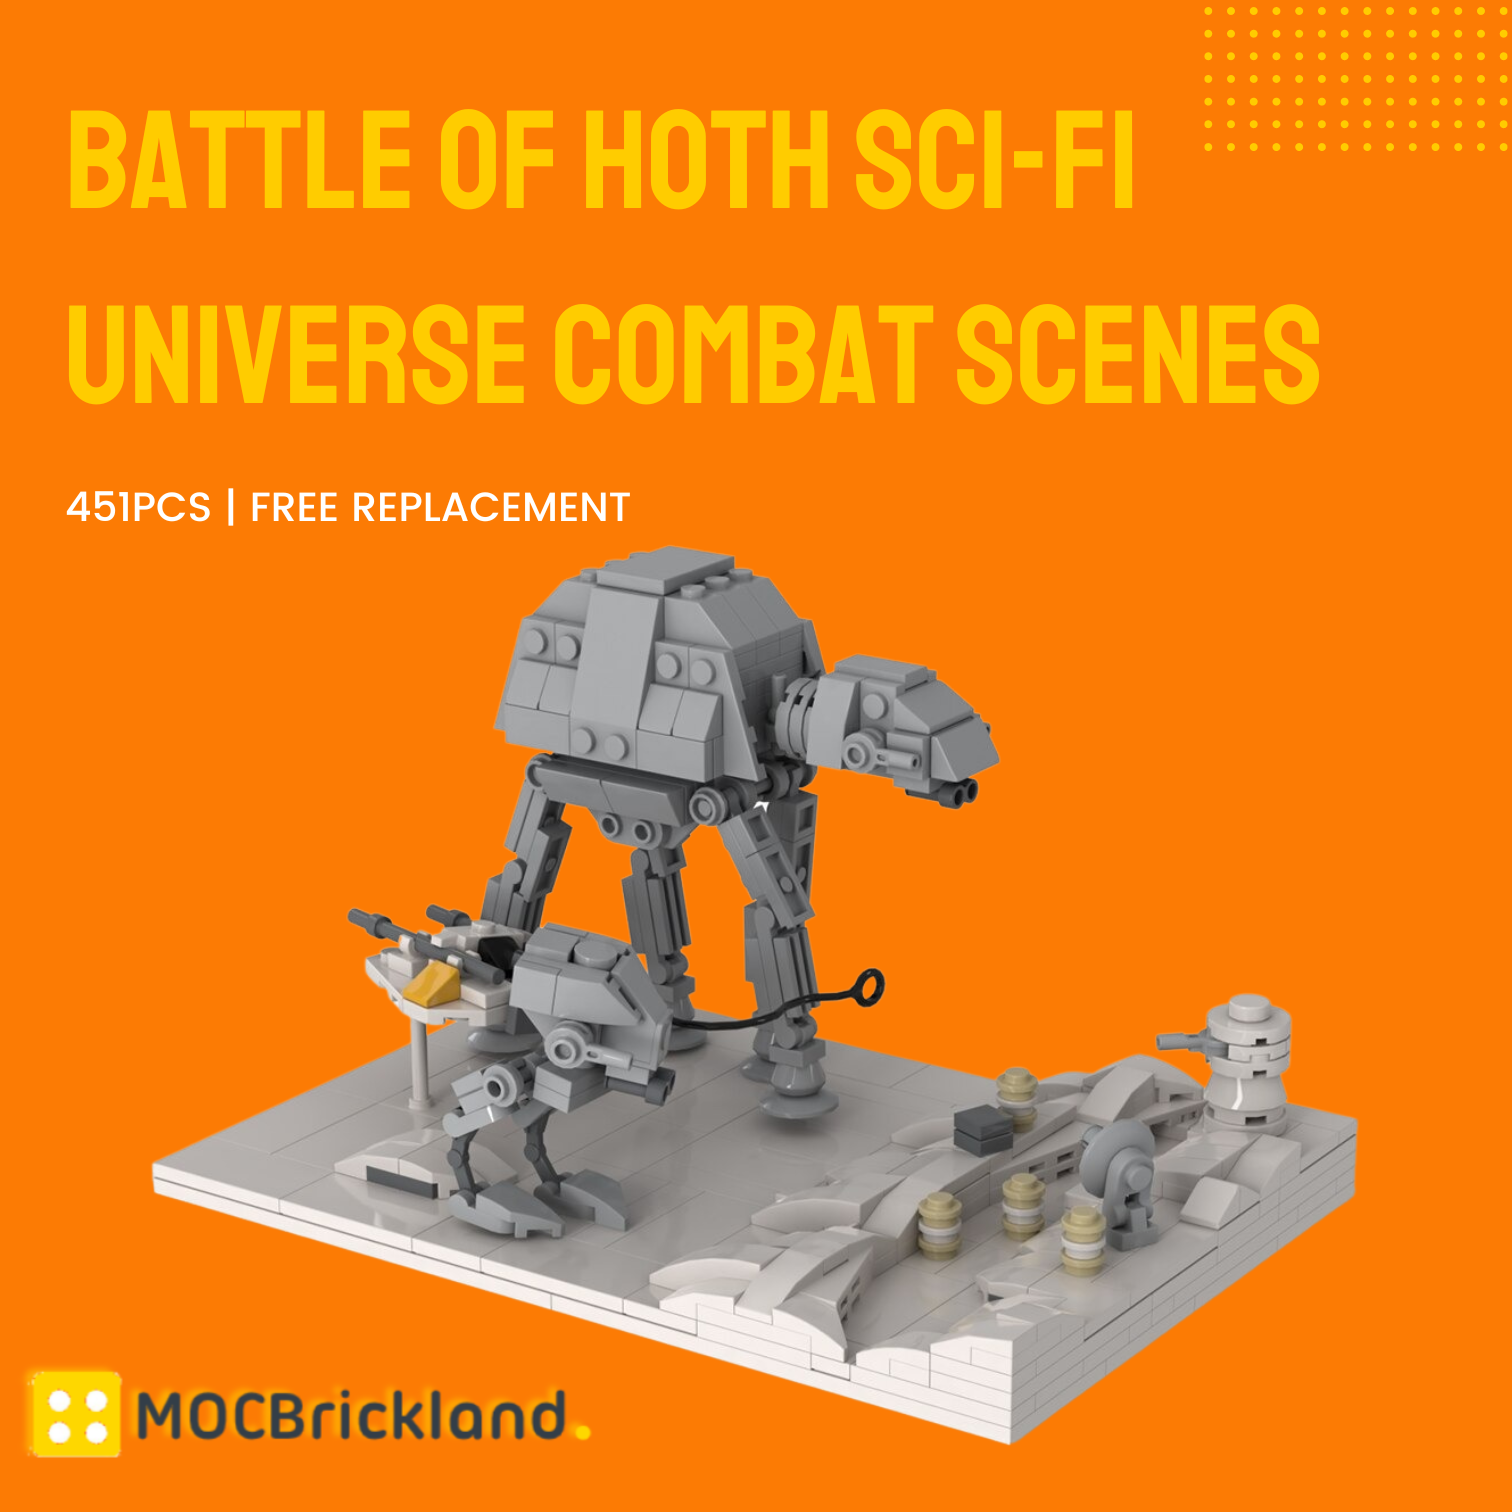 Battle of Hoth Sci-Fi Universe Combat Scenes MOC-52197 Star Wars With 451pcs 